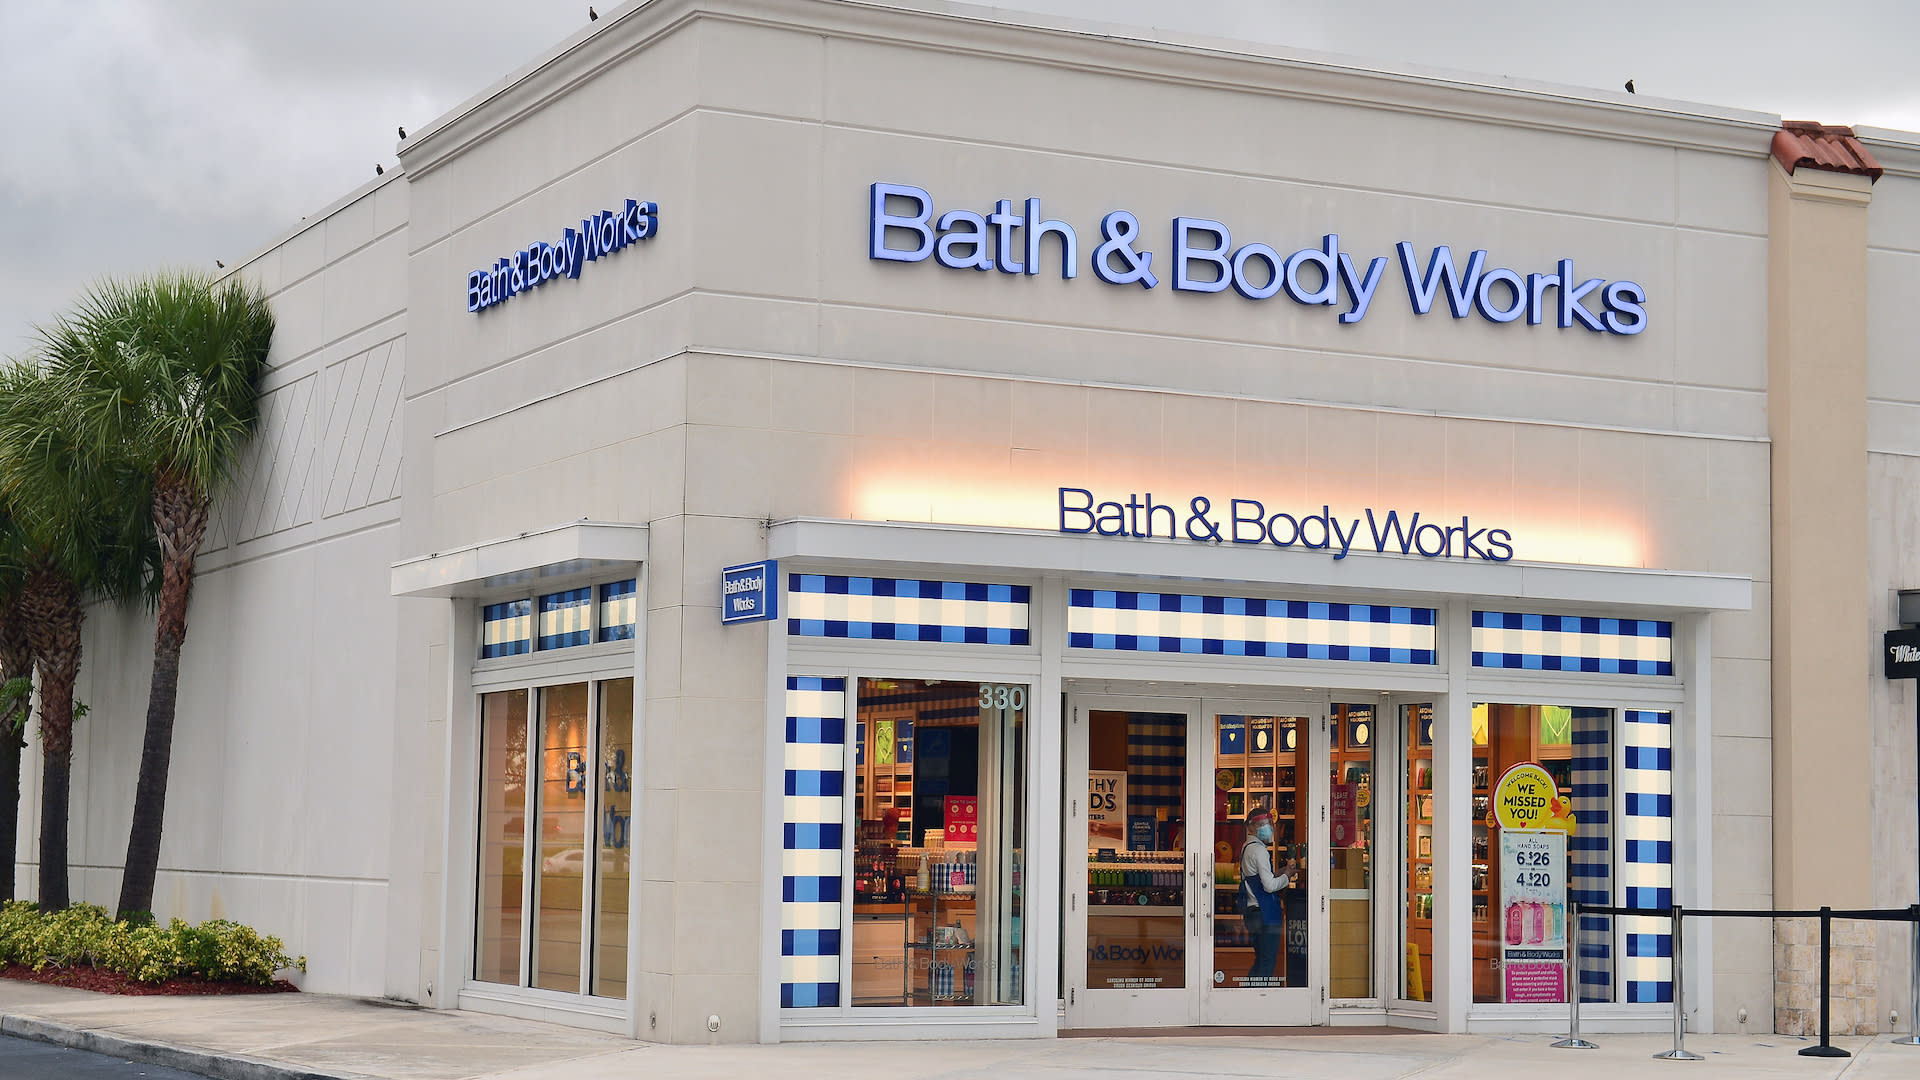 Combat disruptions between customers and employees at Arizona Bath & Body Works